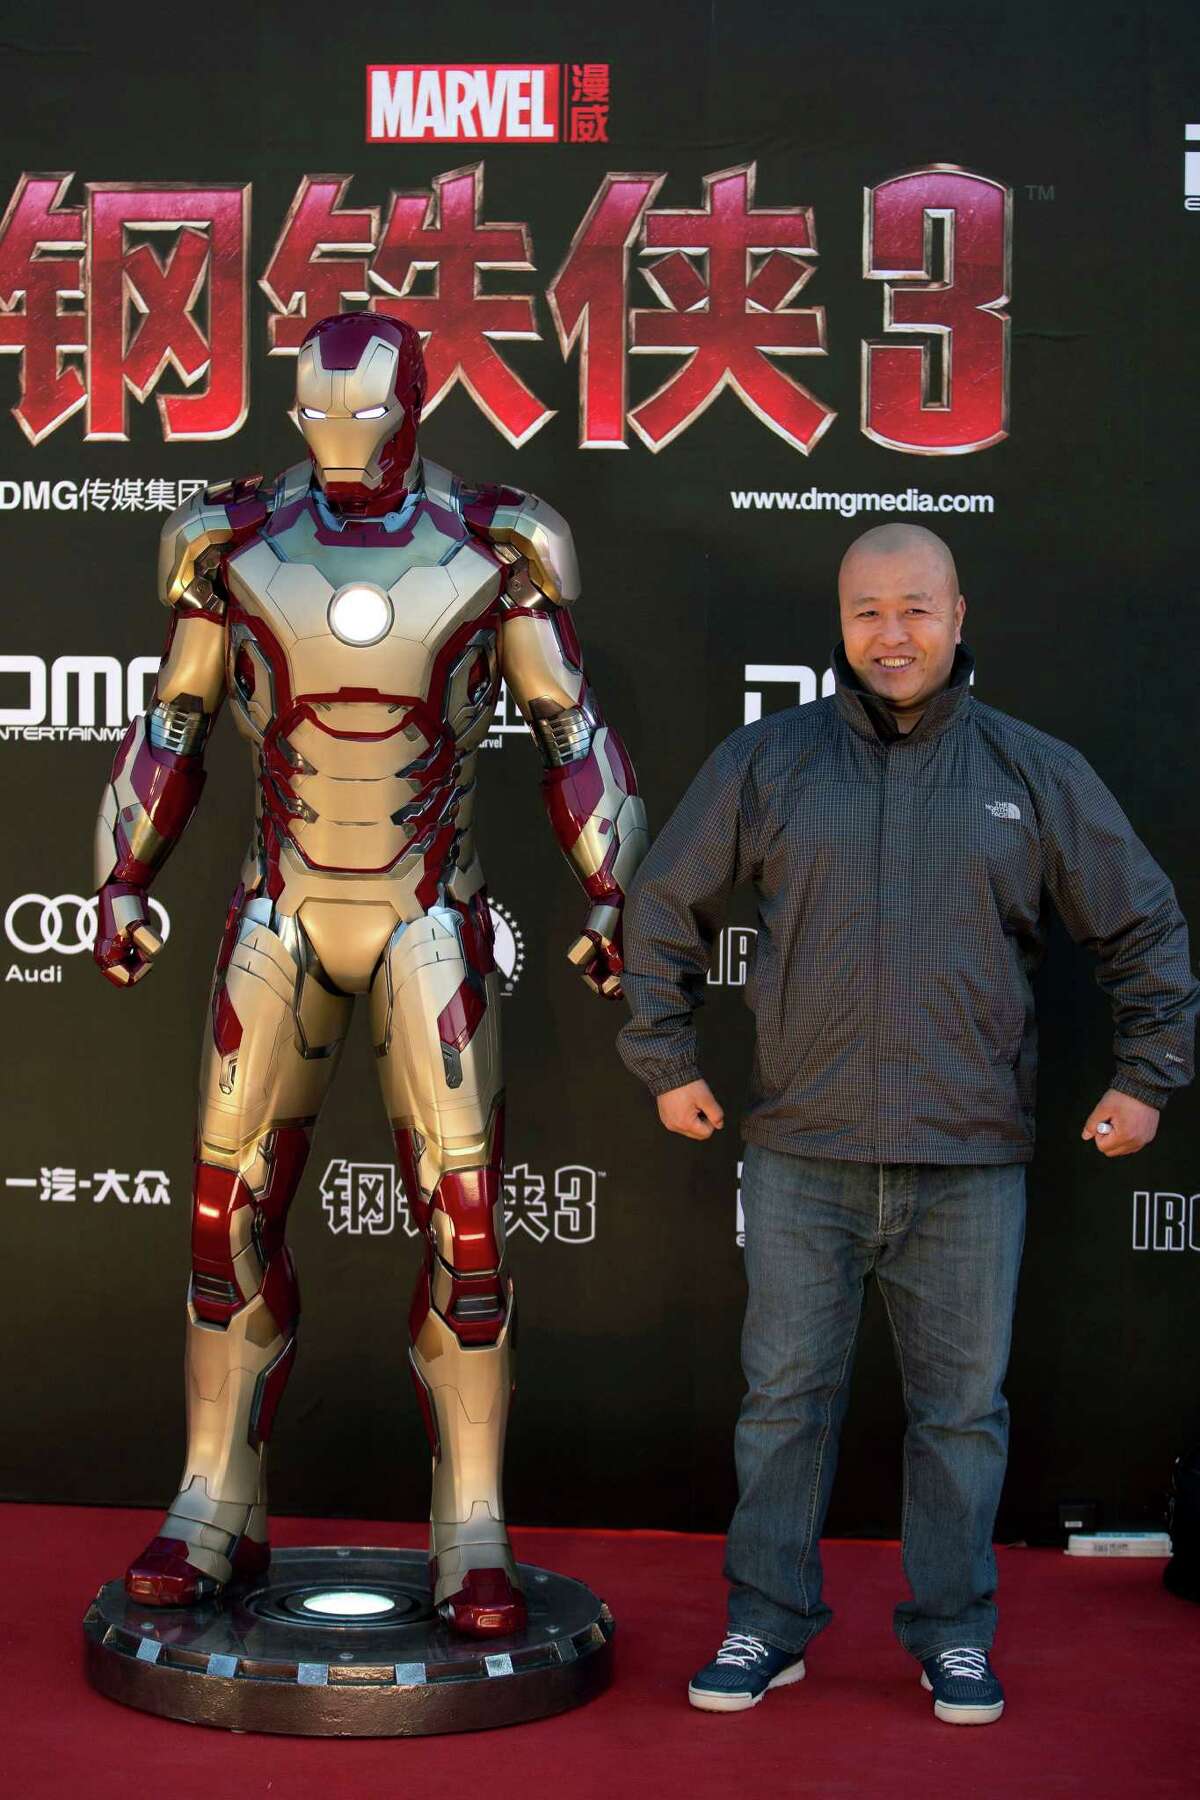 In this photo taken Saturday, April 6, 2013, a Chinese man poses for photographers on stage during a promotional event for the movie "Iron Man 3" before its release in China in early May at the Imperial Ancestral Temple in Beijing's Forbidden City. From demanding changes in plot lines that denigrate the Chinese leadership, to dampening lurid depictions of sex and violence, Beijing is having increasing success in pressuring Hollywood into deleting movie content Beijing finds objectionable. It's even getting American studios to sanction alternative versions of films specially tailored for Chinese audiences, like "Iron Man 3," which debuts in theaters around the world later this week. The Chinese version features local heartthrob Fan Bingbing — absent from the version showing abroad — and lengthy clips of Chinese scenery that local audiences love.(AP Photo/Andy Wong)